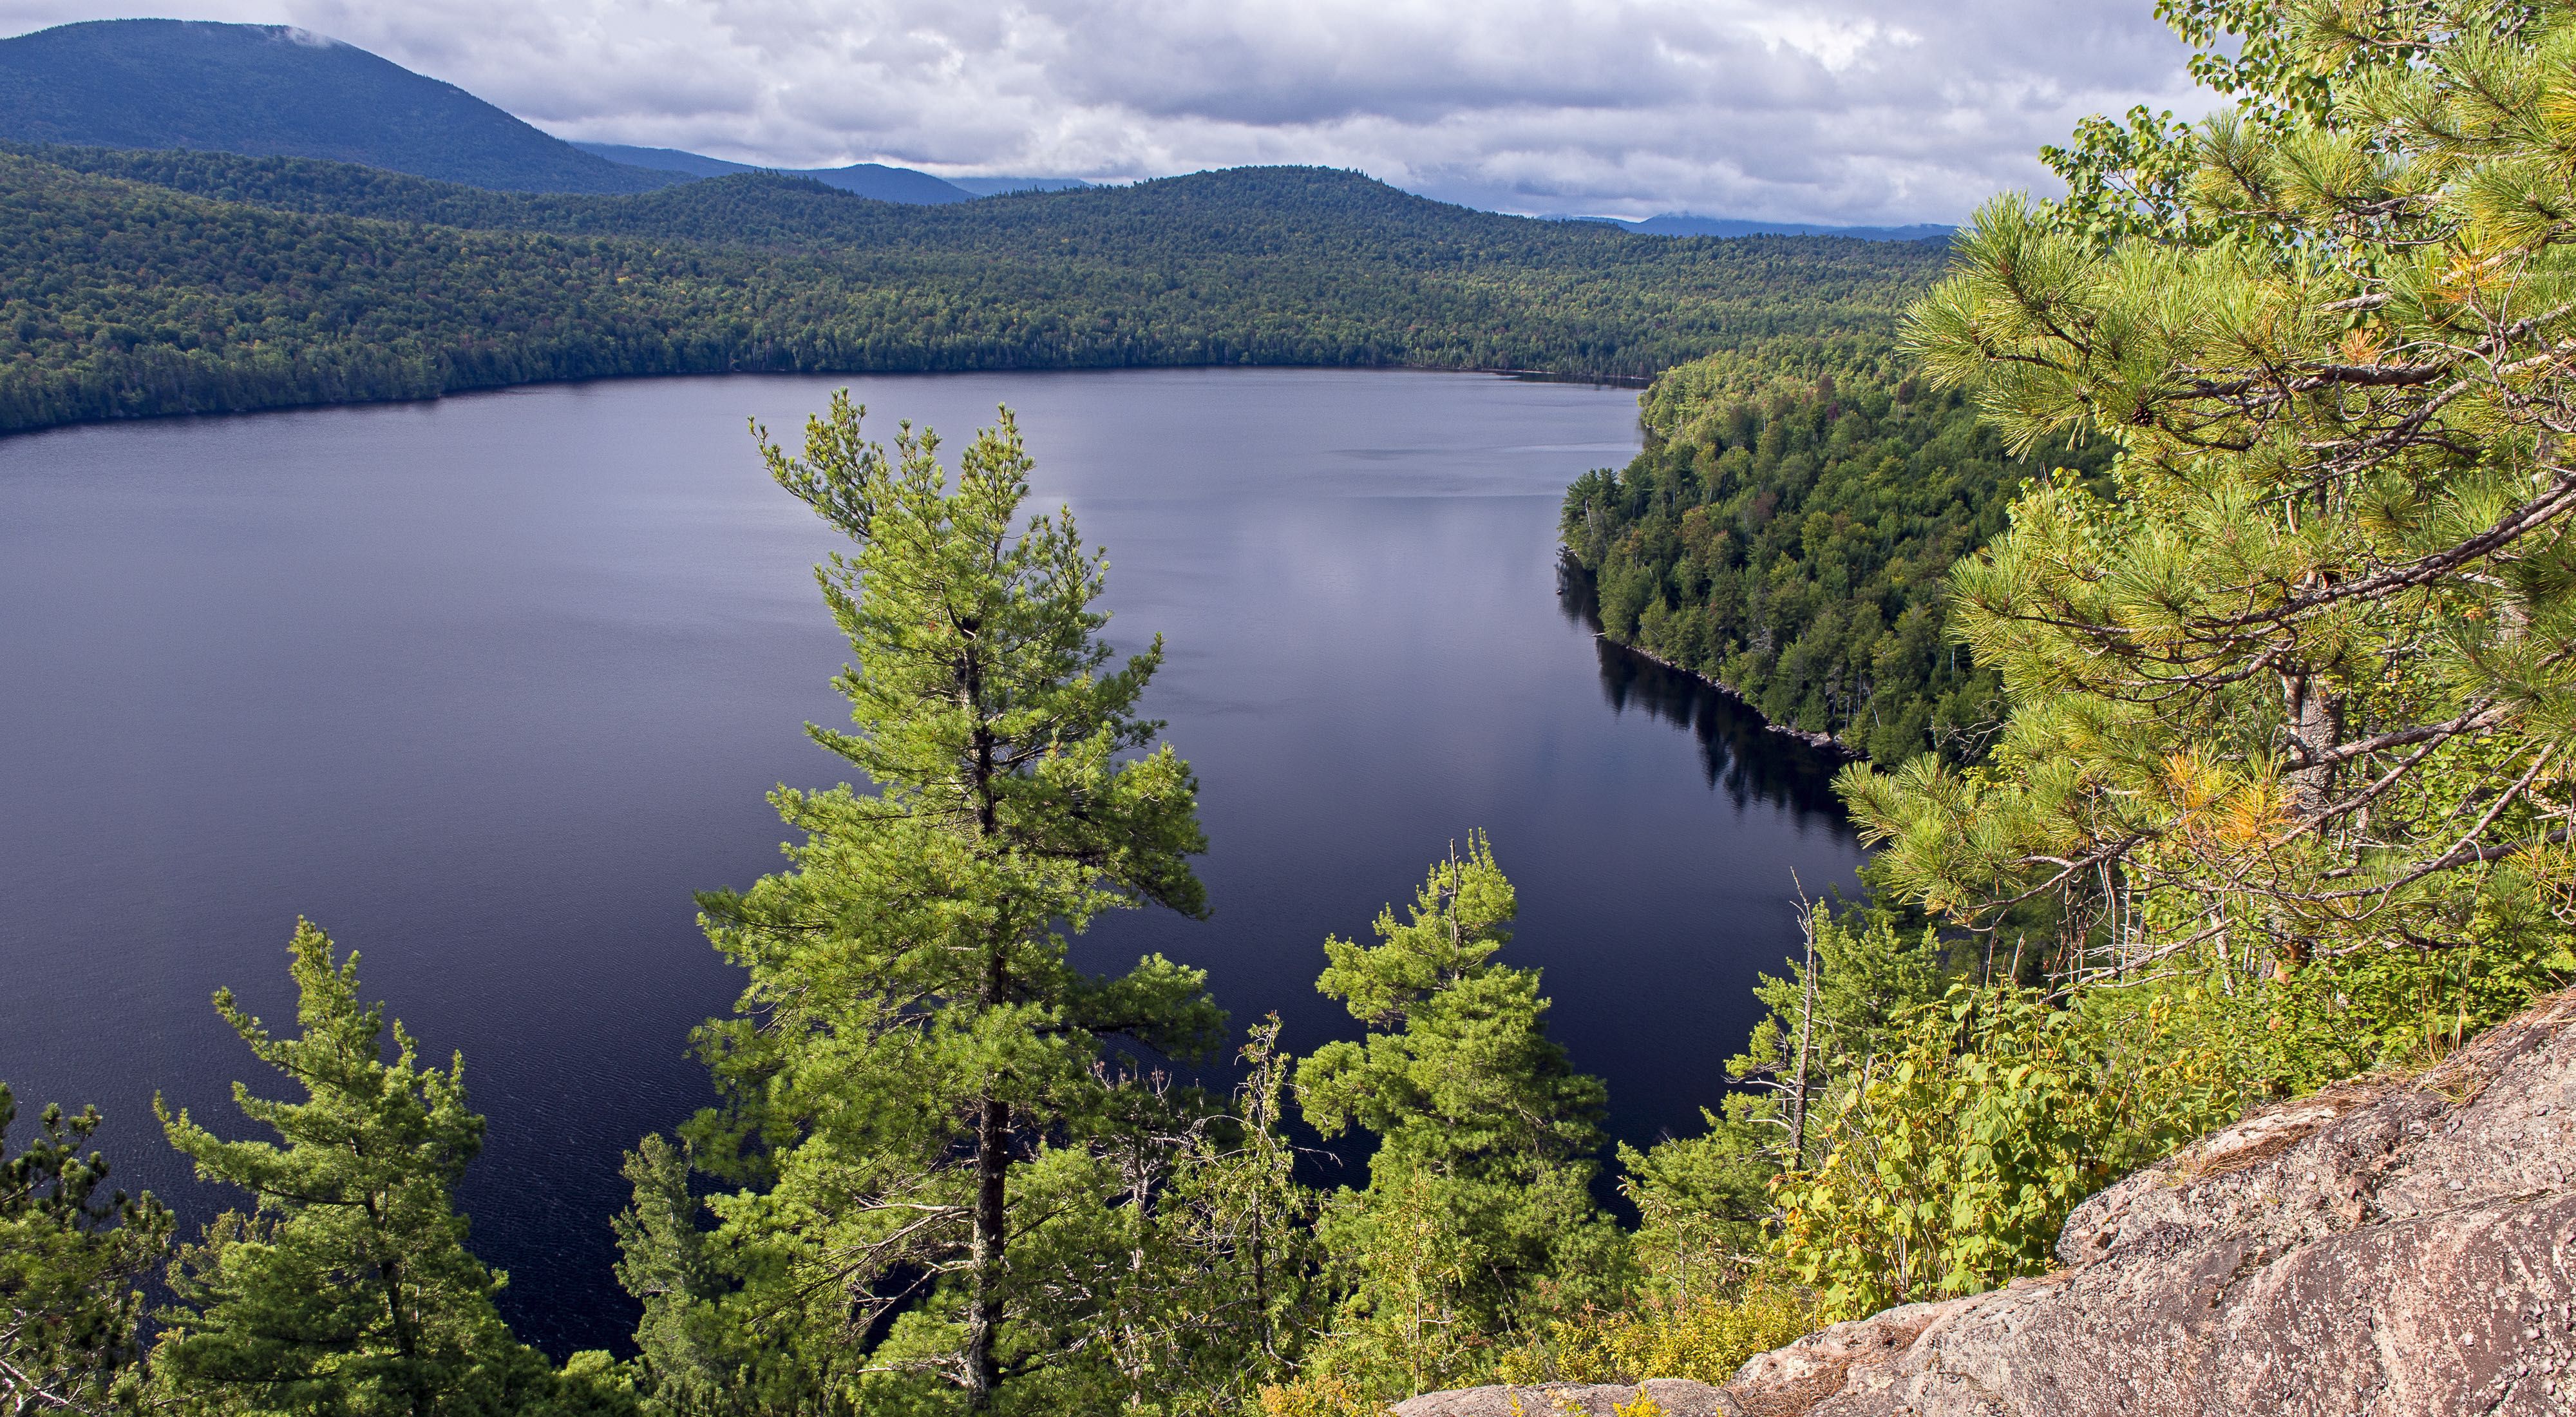 A view from atop a gray boulder on the righthand side of the image looking out onto a blue lake with green trees lining the shore.